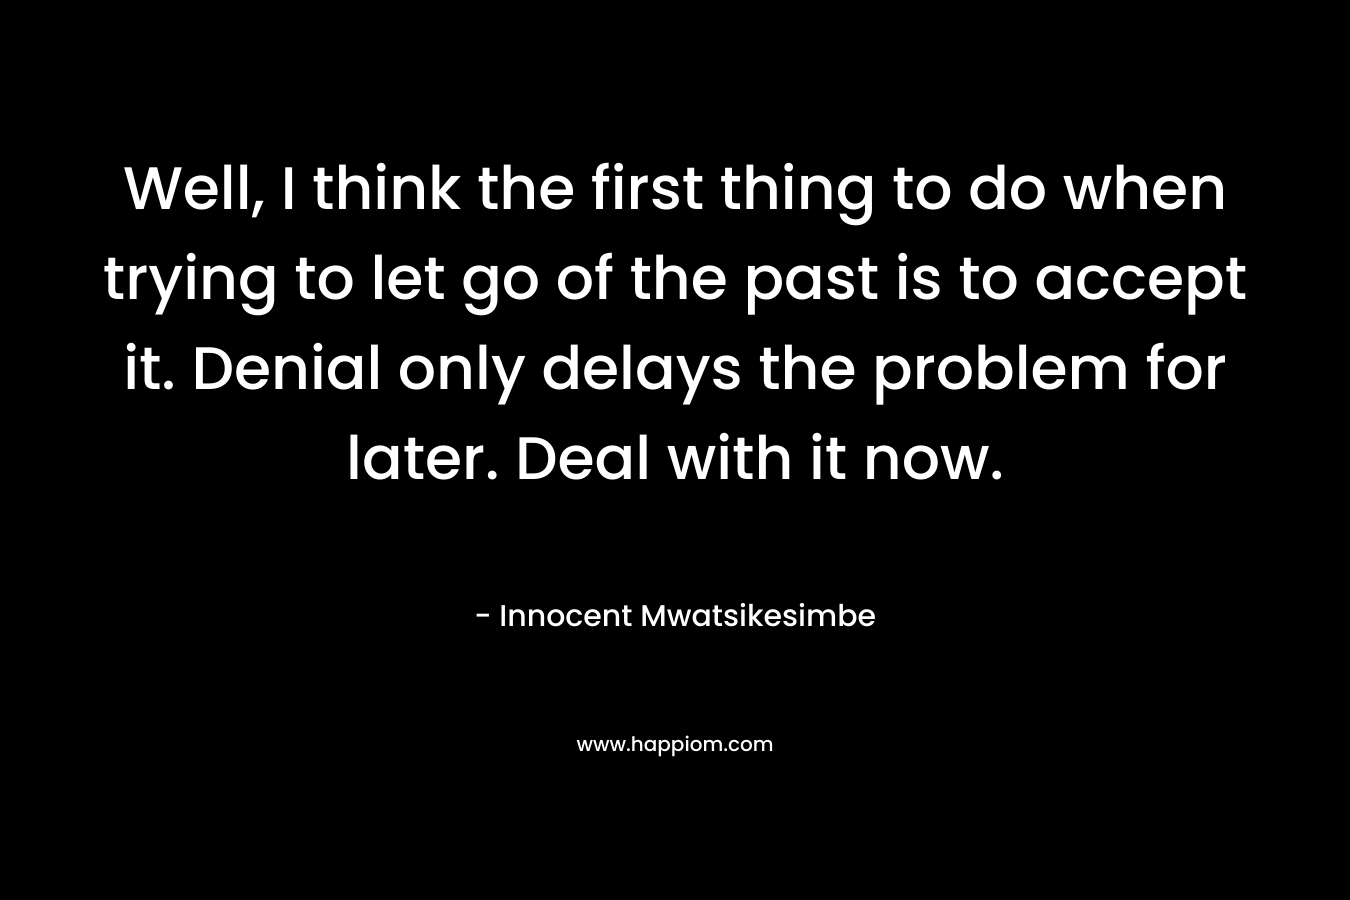 Well, I think the first thing to do when trying to let go of the past is to accept it. Denial only delays the problem for later. Deal with it now. – Innocent Mwatsikesimbe